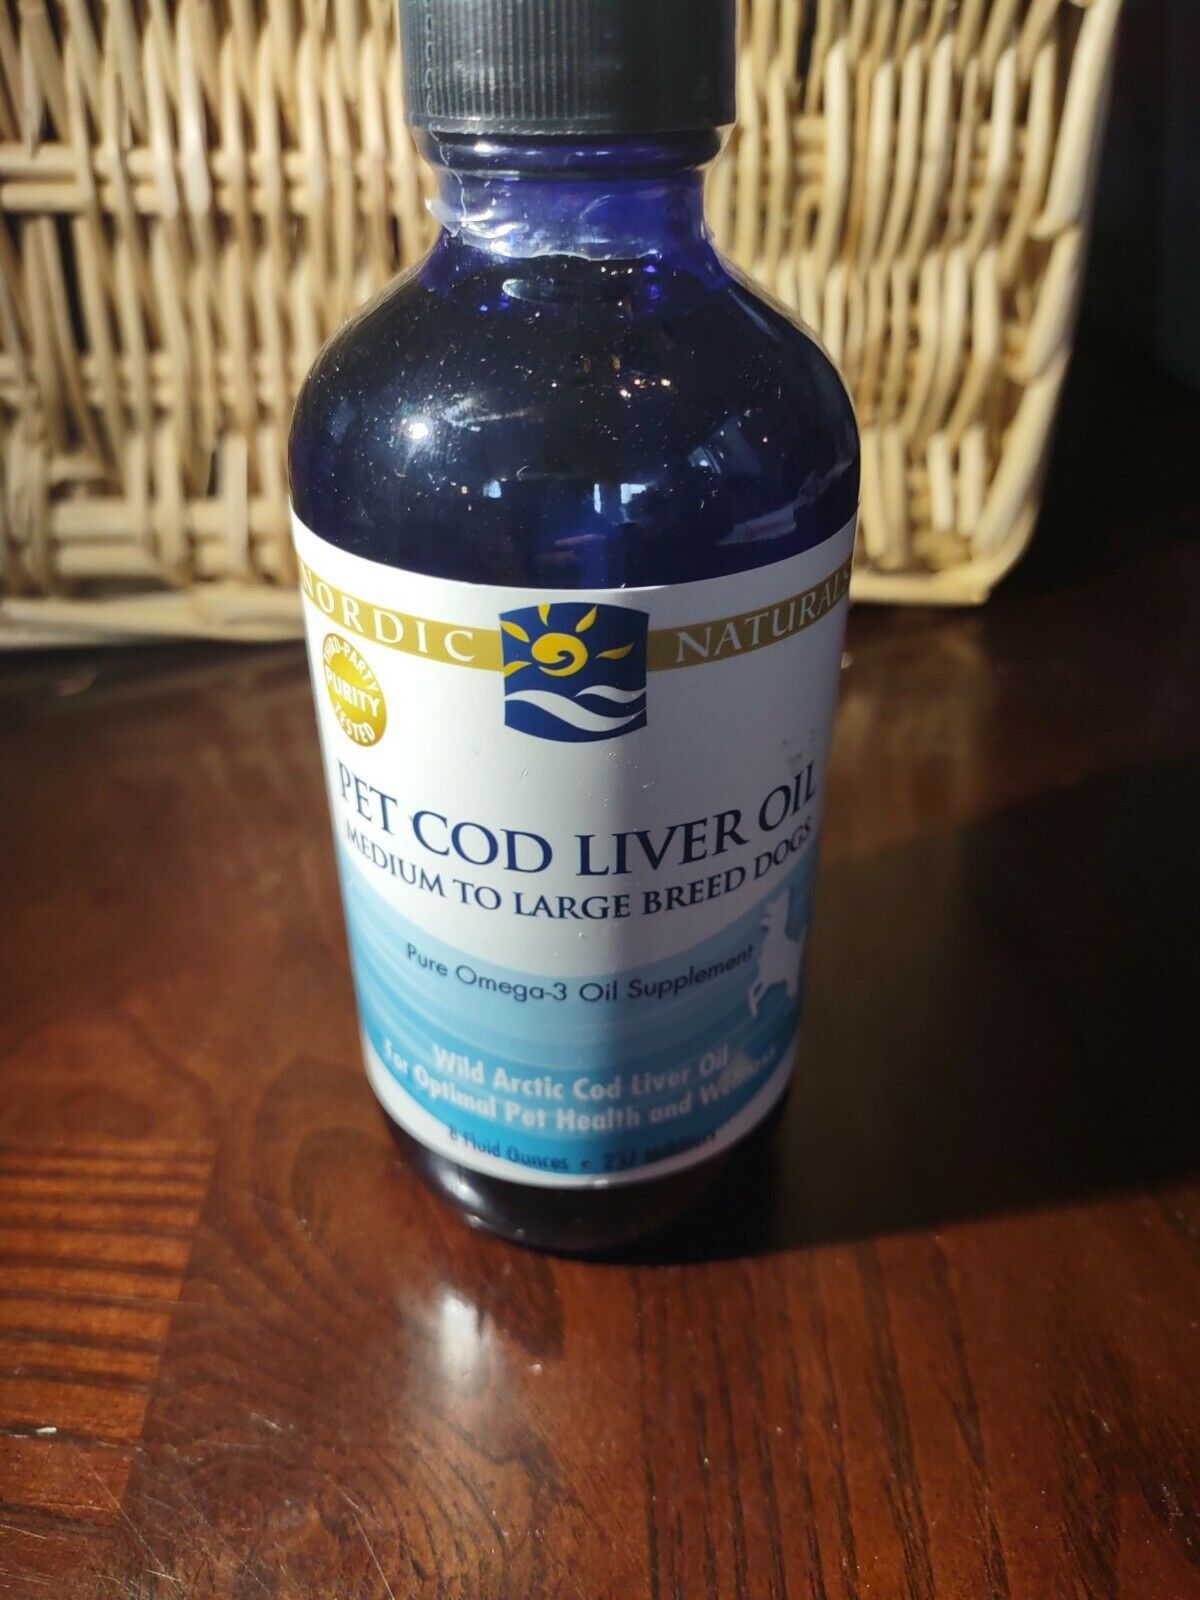 Pet Cod Liver Oil Medium To Large Breed Dogs - $42.45